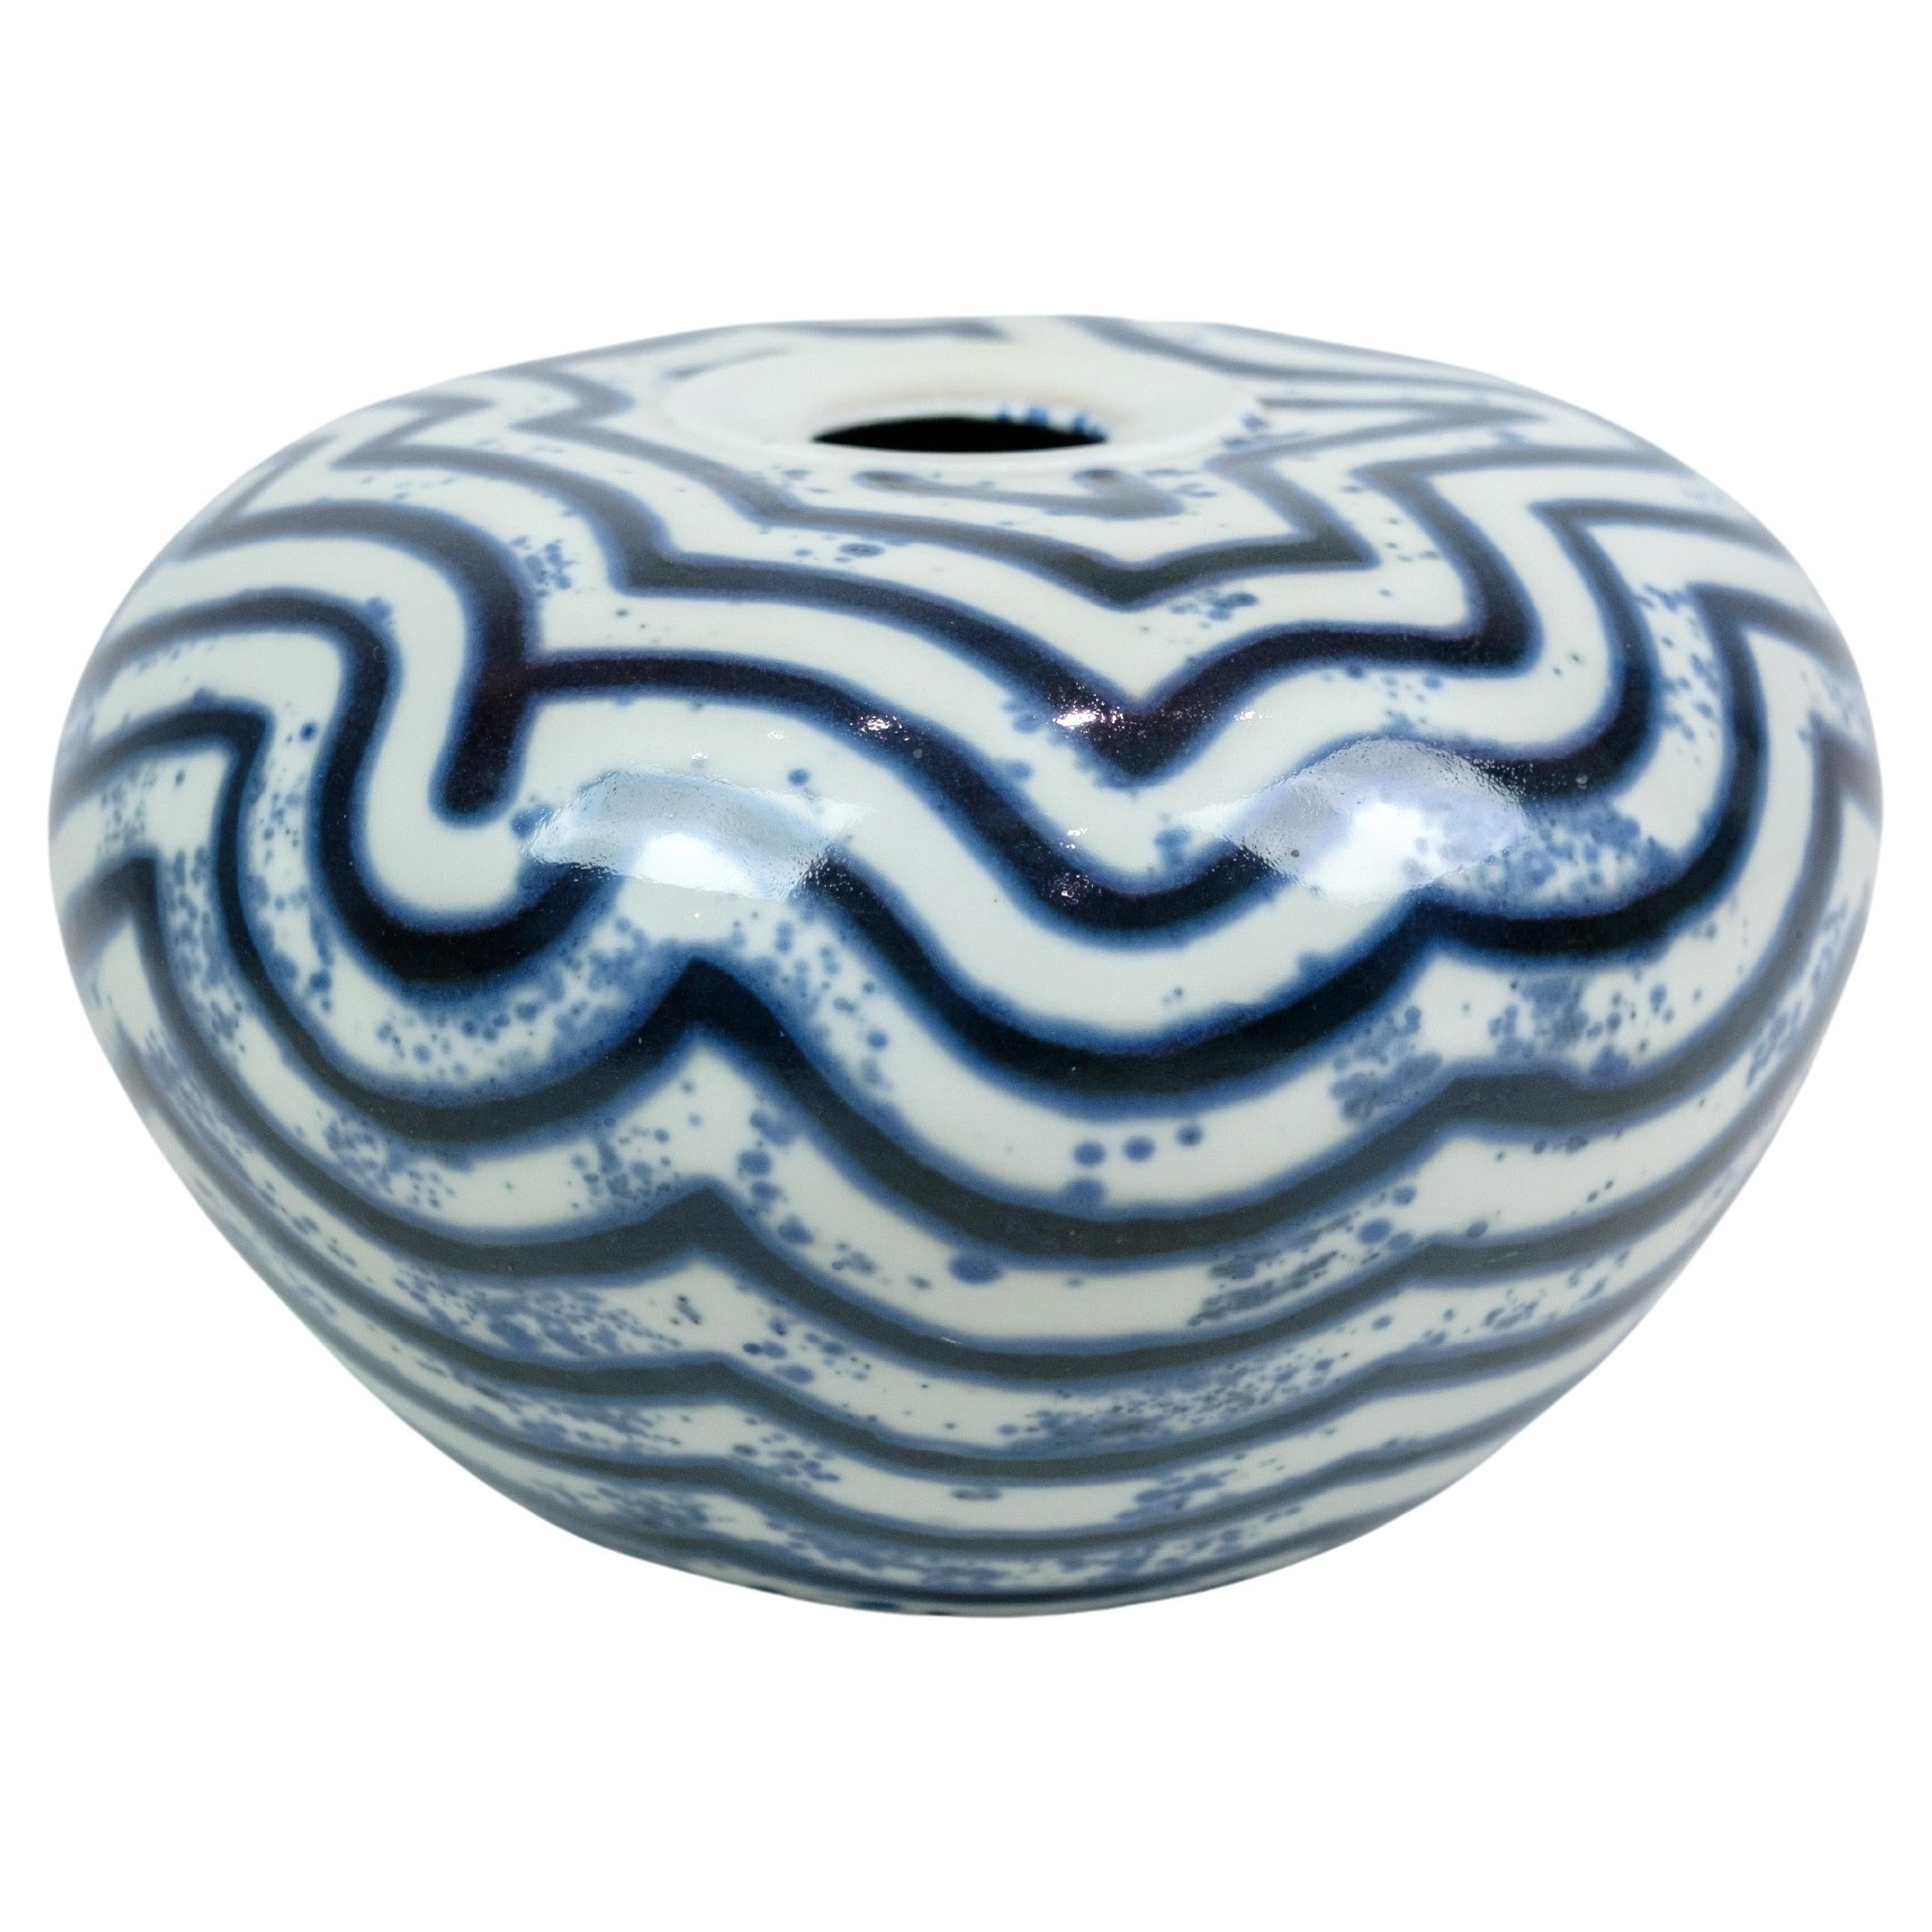 Ceramic Vase In Blue and White Designed By Per Weiss From 1990s For Sale